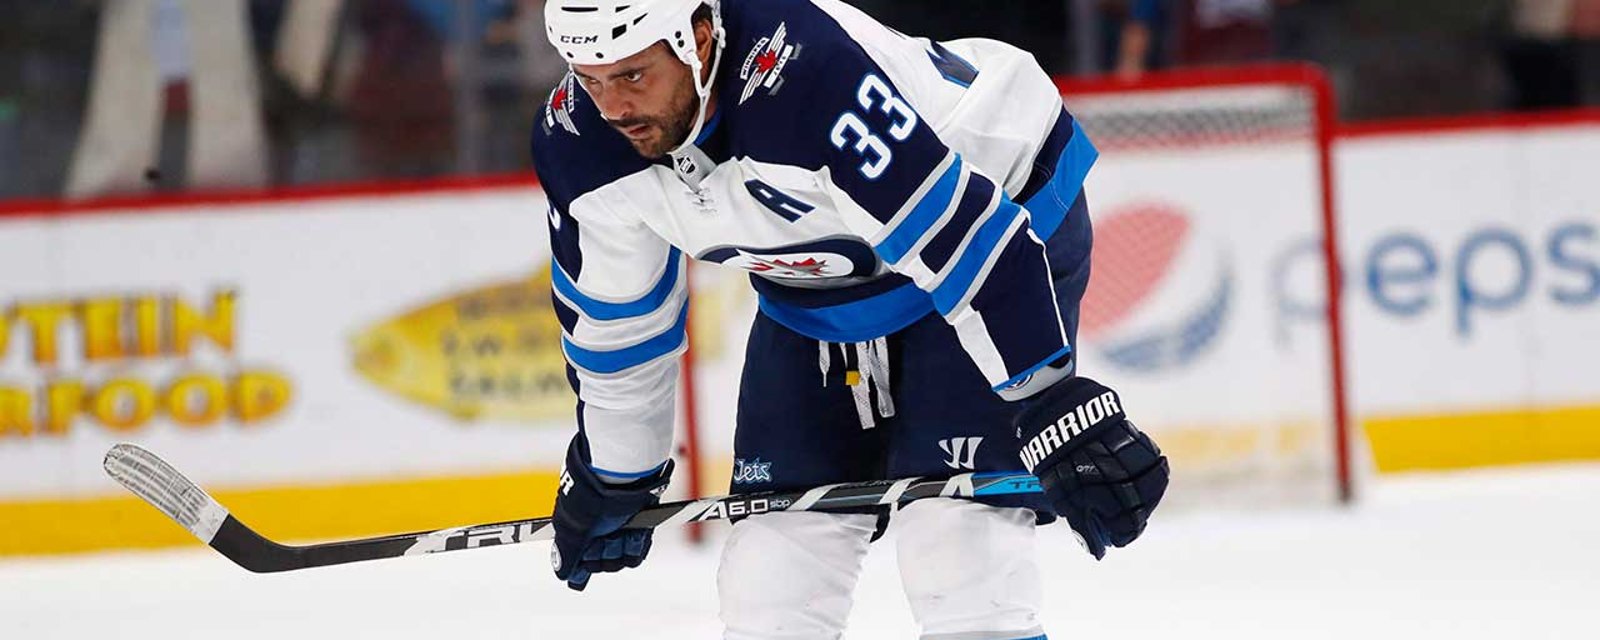 Breaking: Jets lose Byfuglien once again to injury...